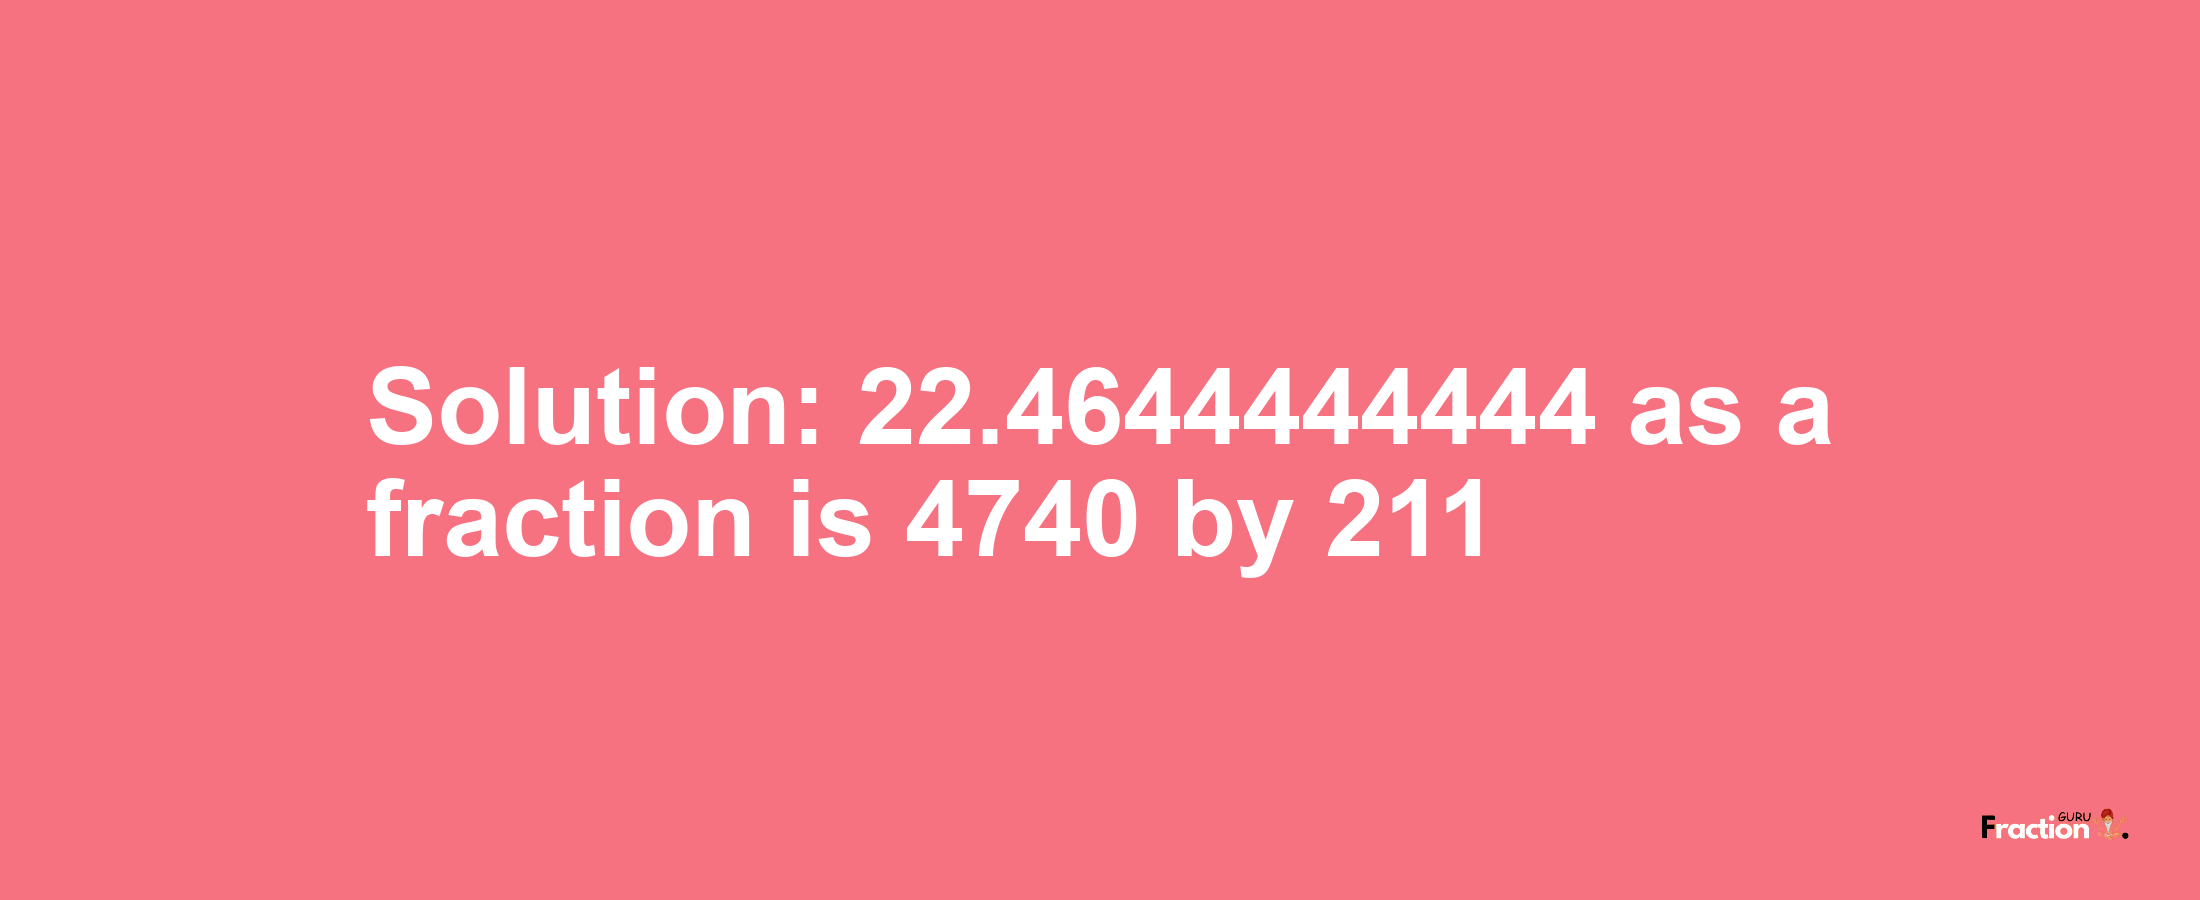 Solution:22.4644444444 as a fraction is 4740/211